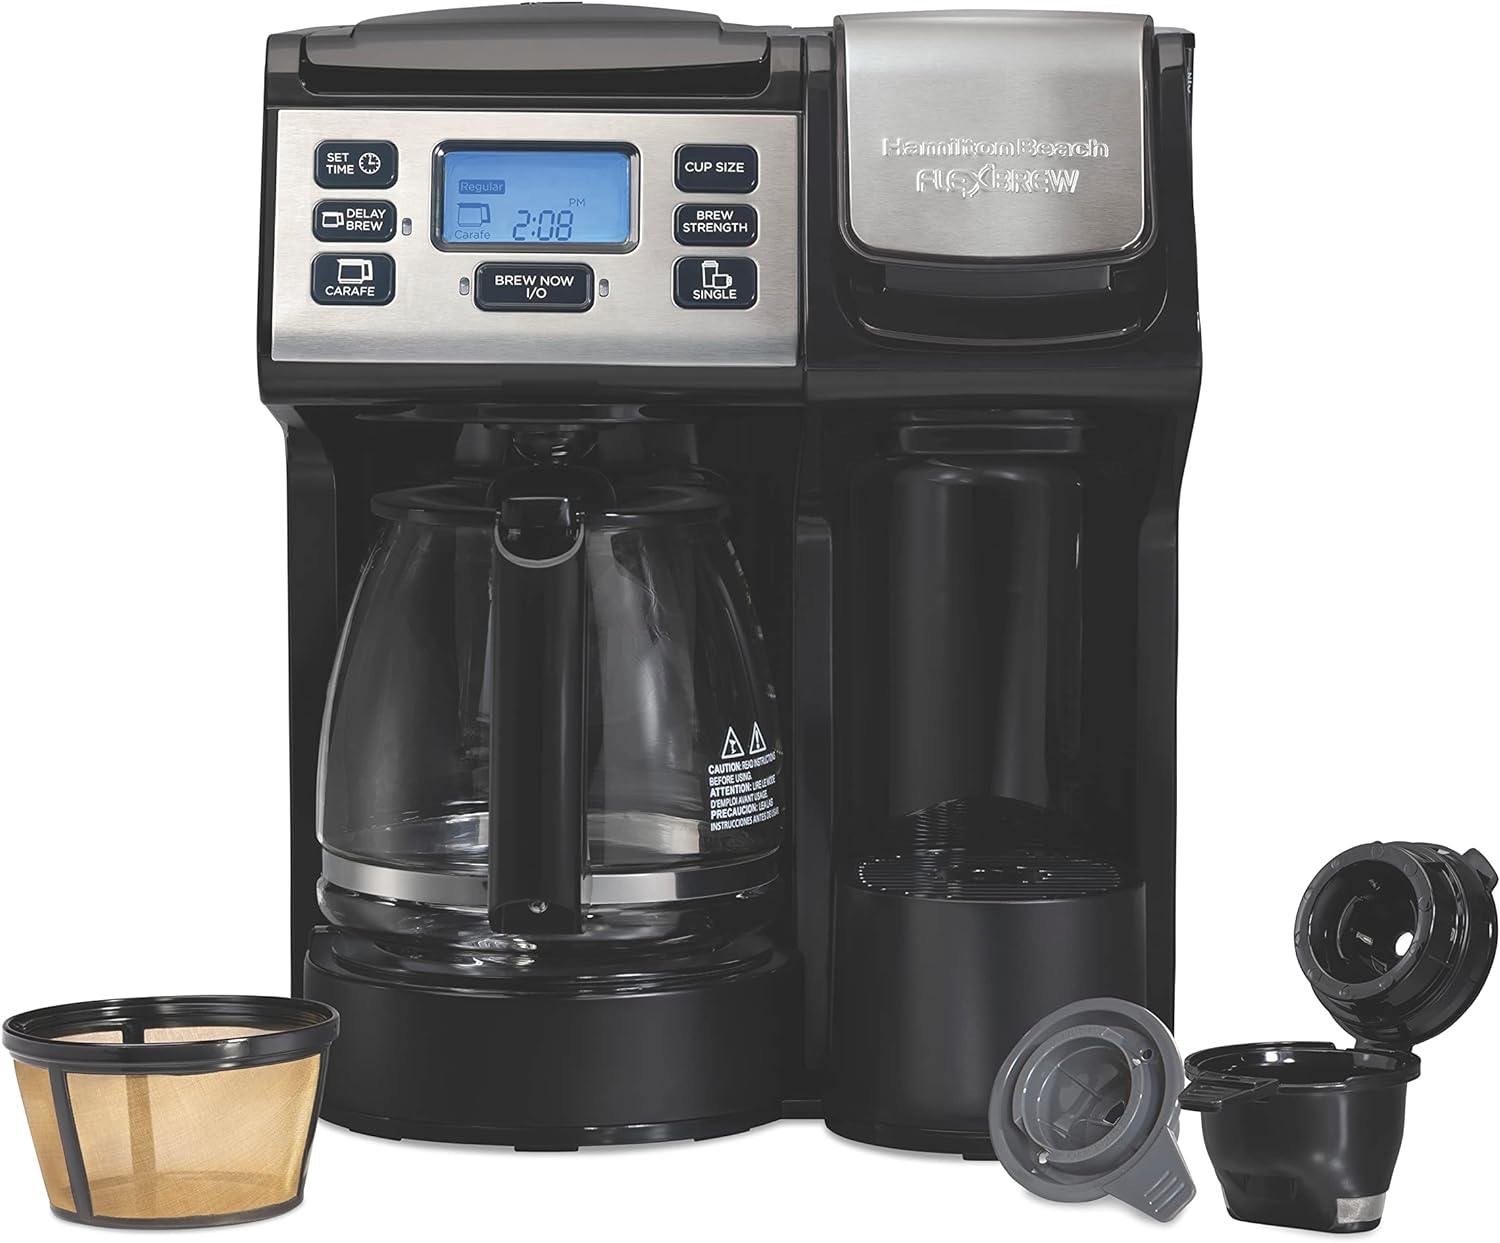 Hamilton Beach 49915 FlexBrew Trio 2-Way Coffee Maker, Compatible with K-Cup Pods or Grounds, Single Serve  Full 12c Pot, Black with Stainless Steel Accents, Fast Brewing